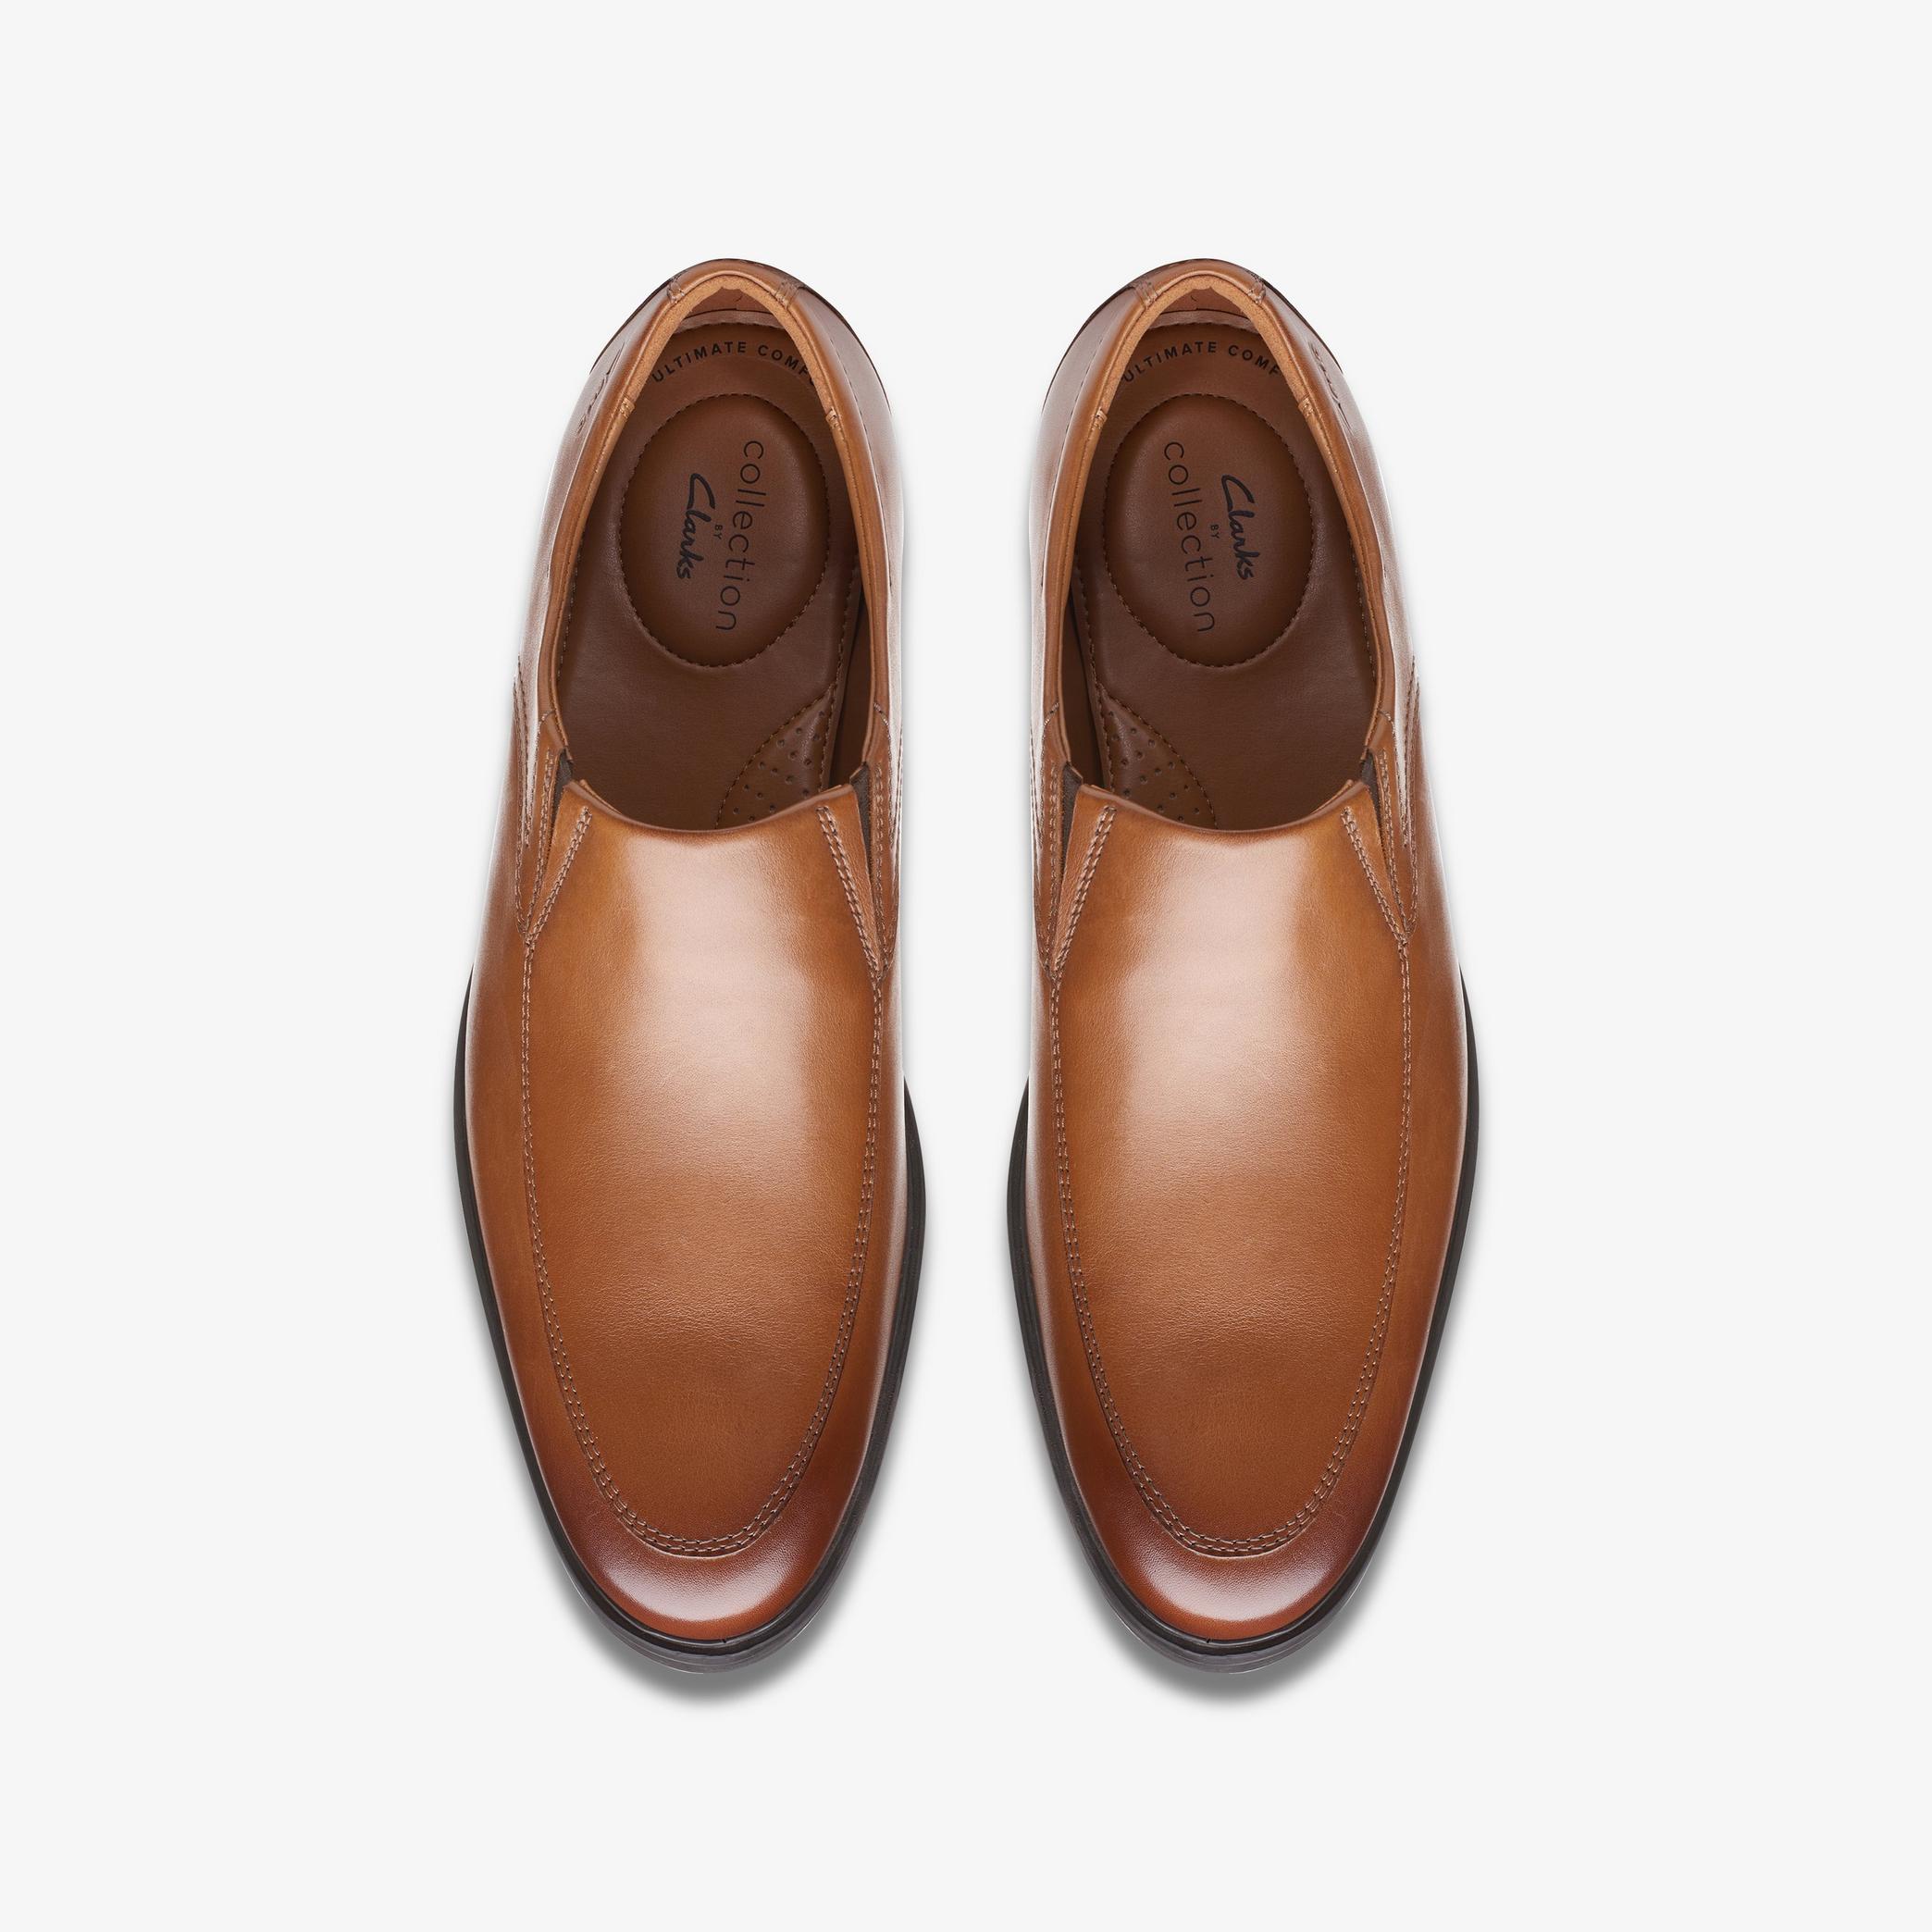 Whiddon Step Dark Tan Leather Loafers, view 6 of 6